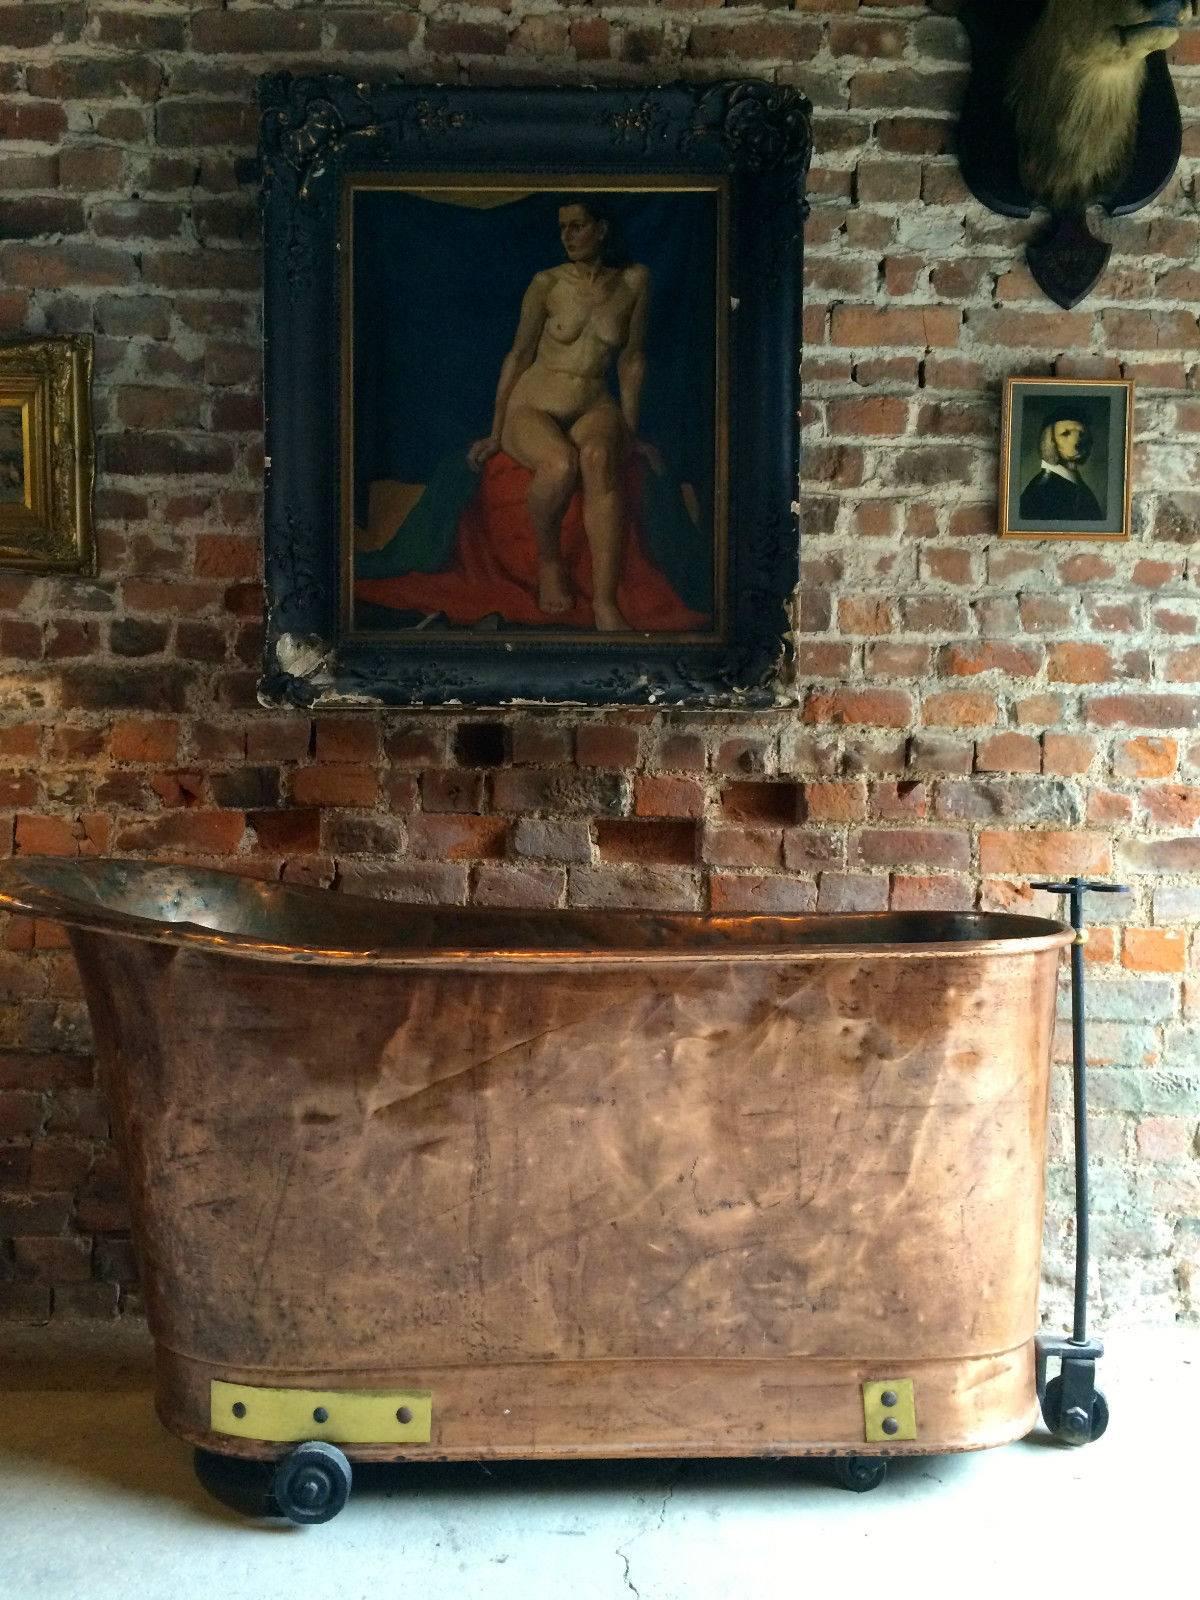 A beautiful antique 19th century Victorian French decorative galvanized copper bath, bound with brass rivets, wrought iron steering frame and sitting on casters, the bath would adorn any room as a functional bath or simply as a piece of cool art